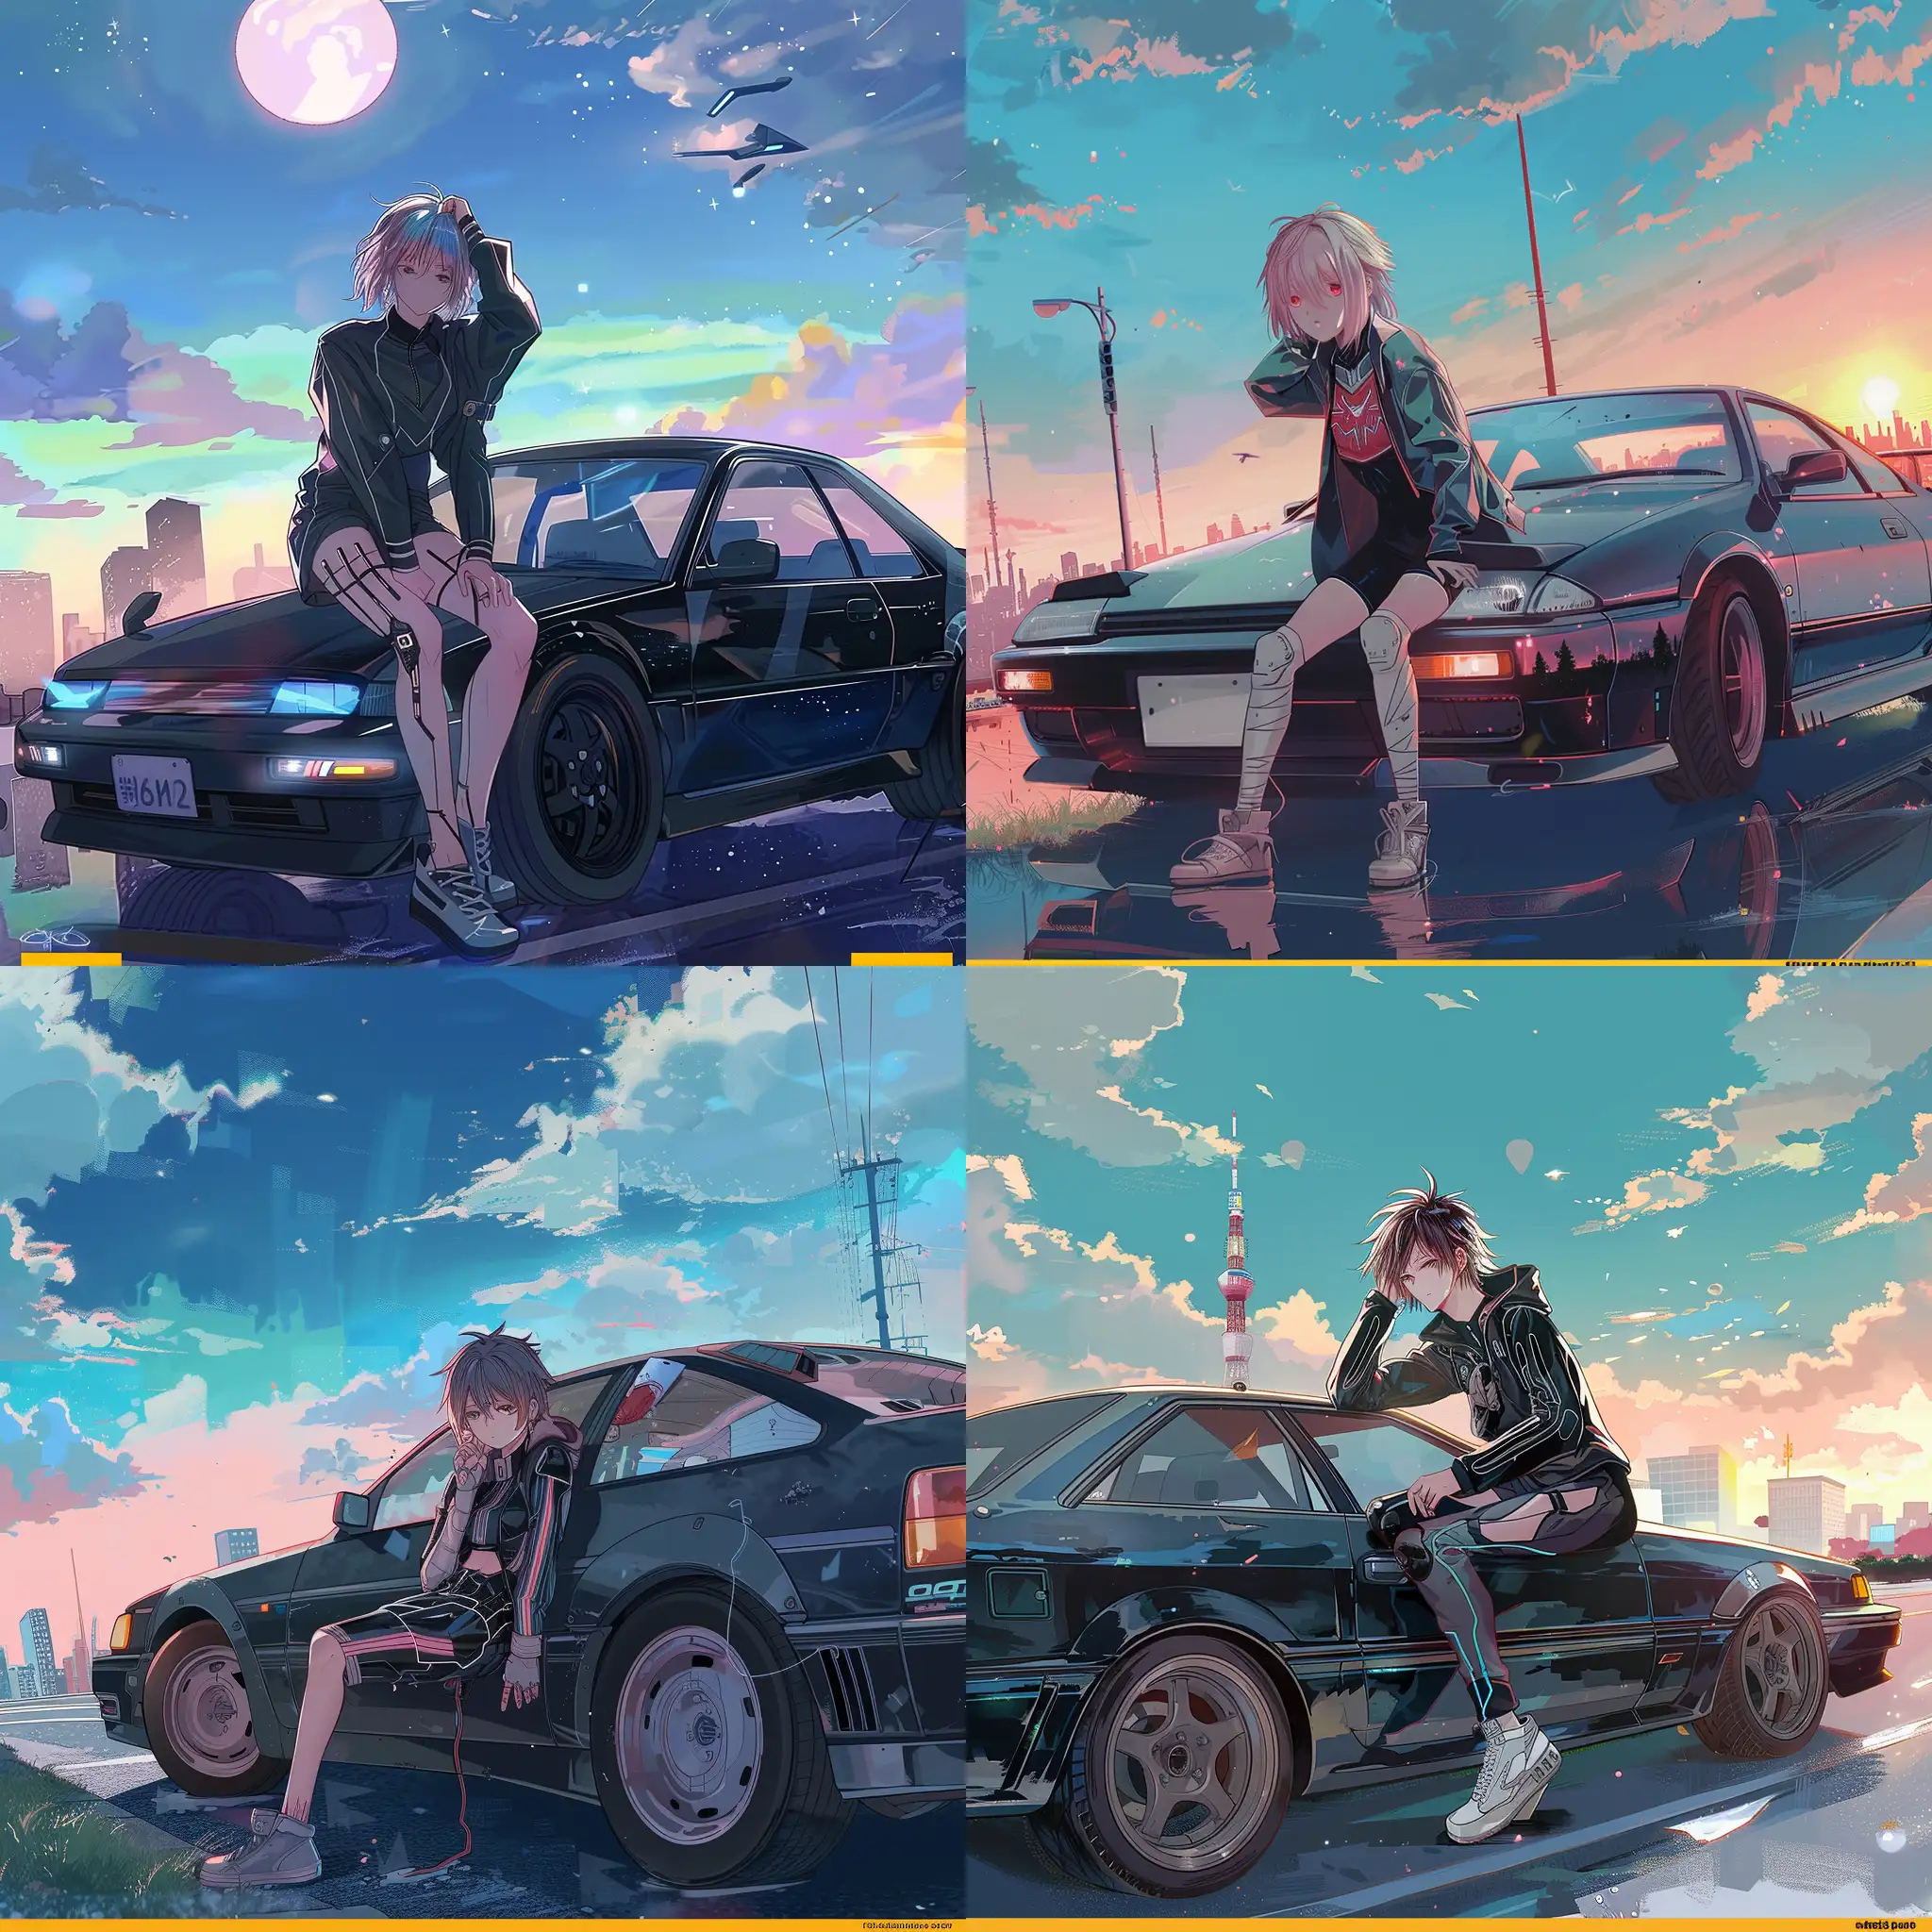 Cyberpunk-Anime-Character-Leaning-on-Car-Outside-the-City